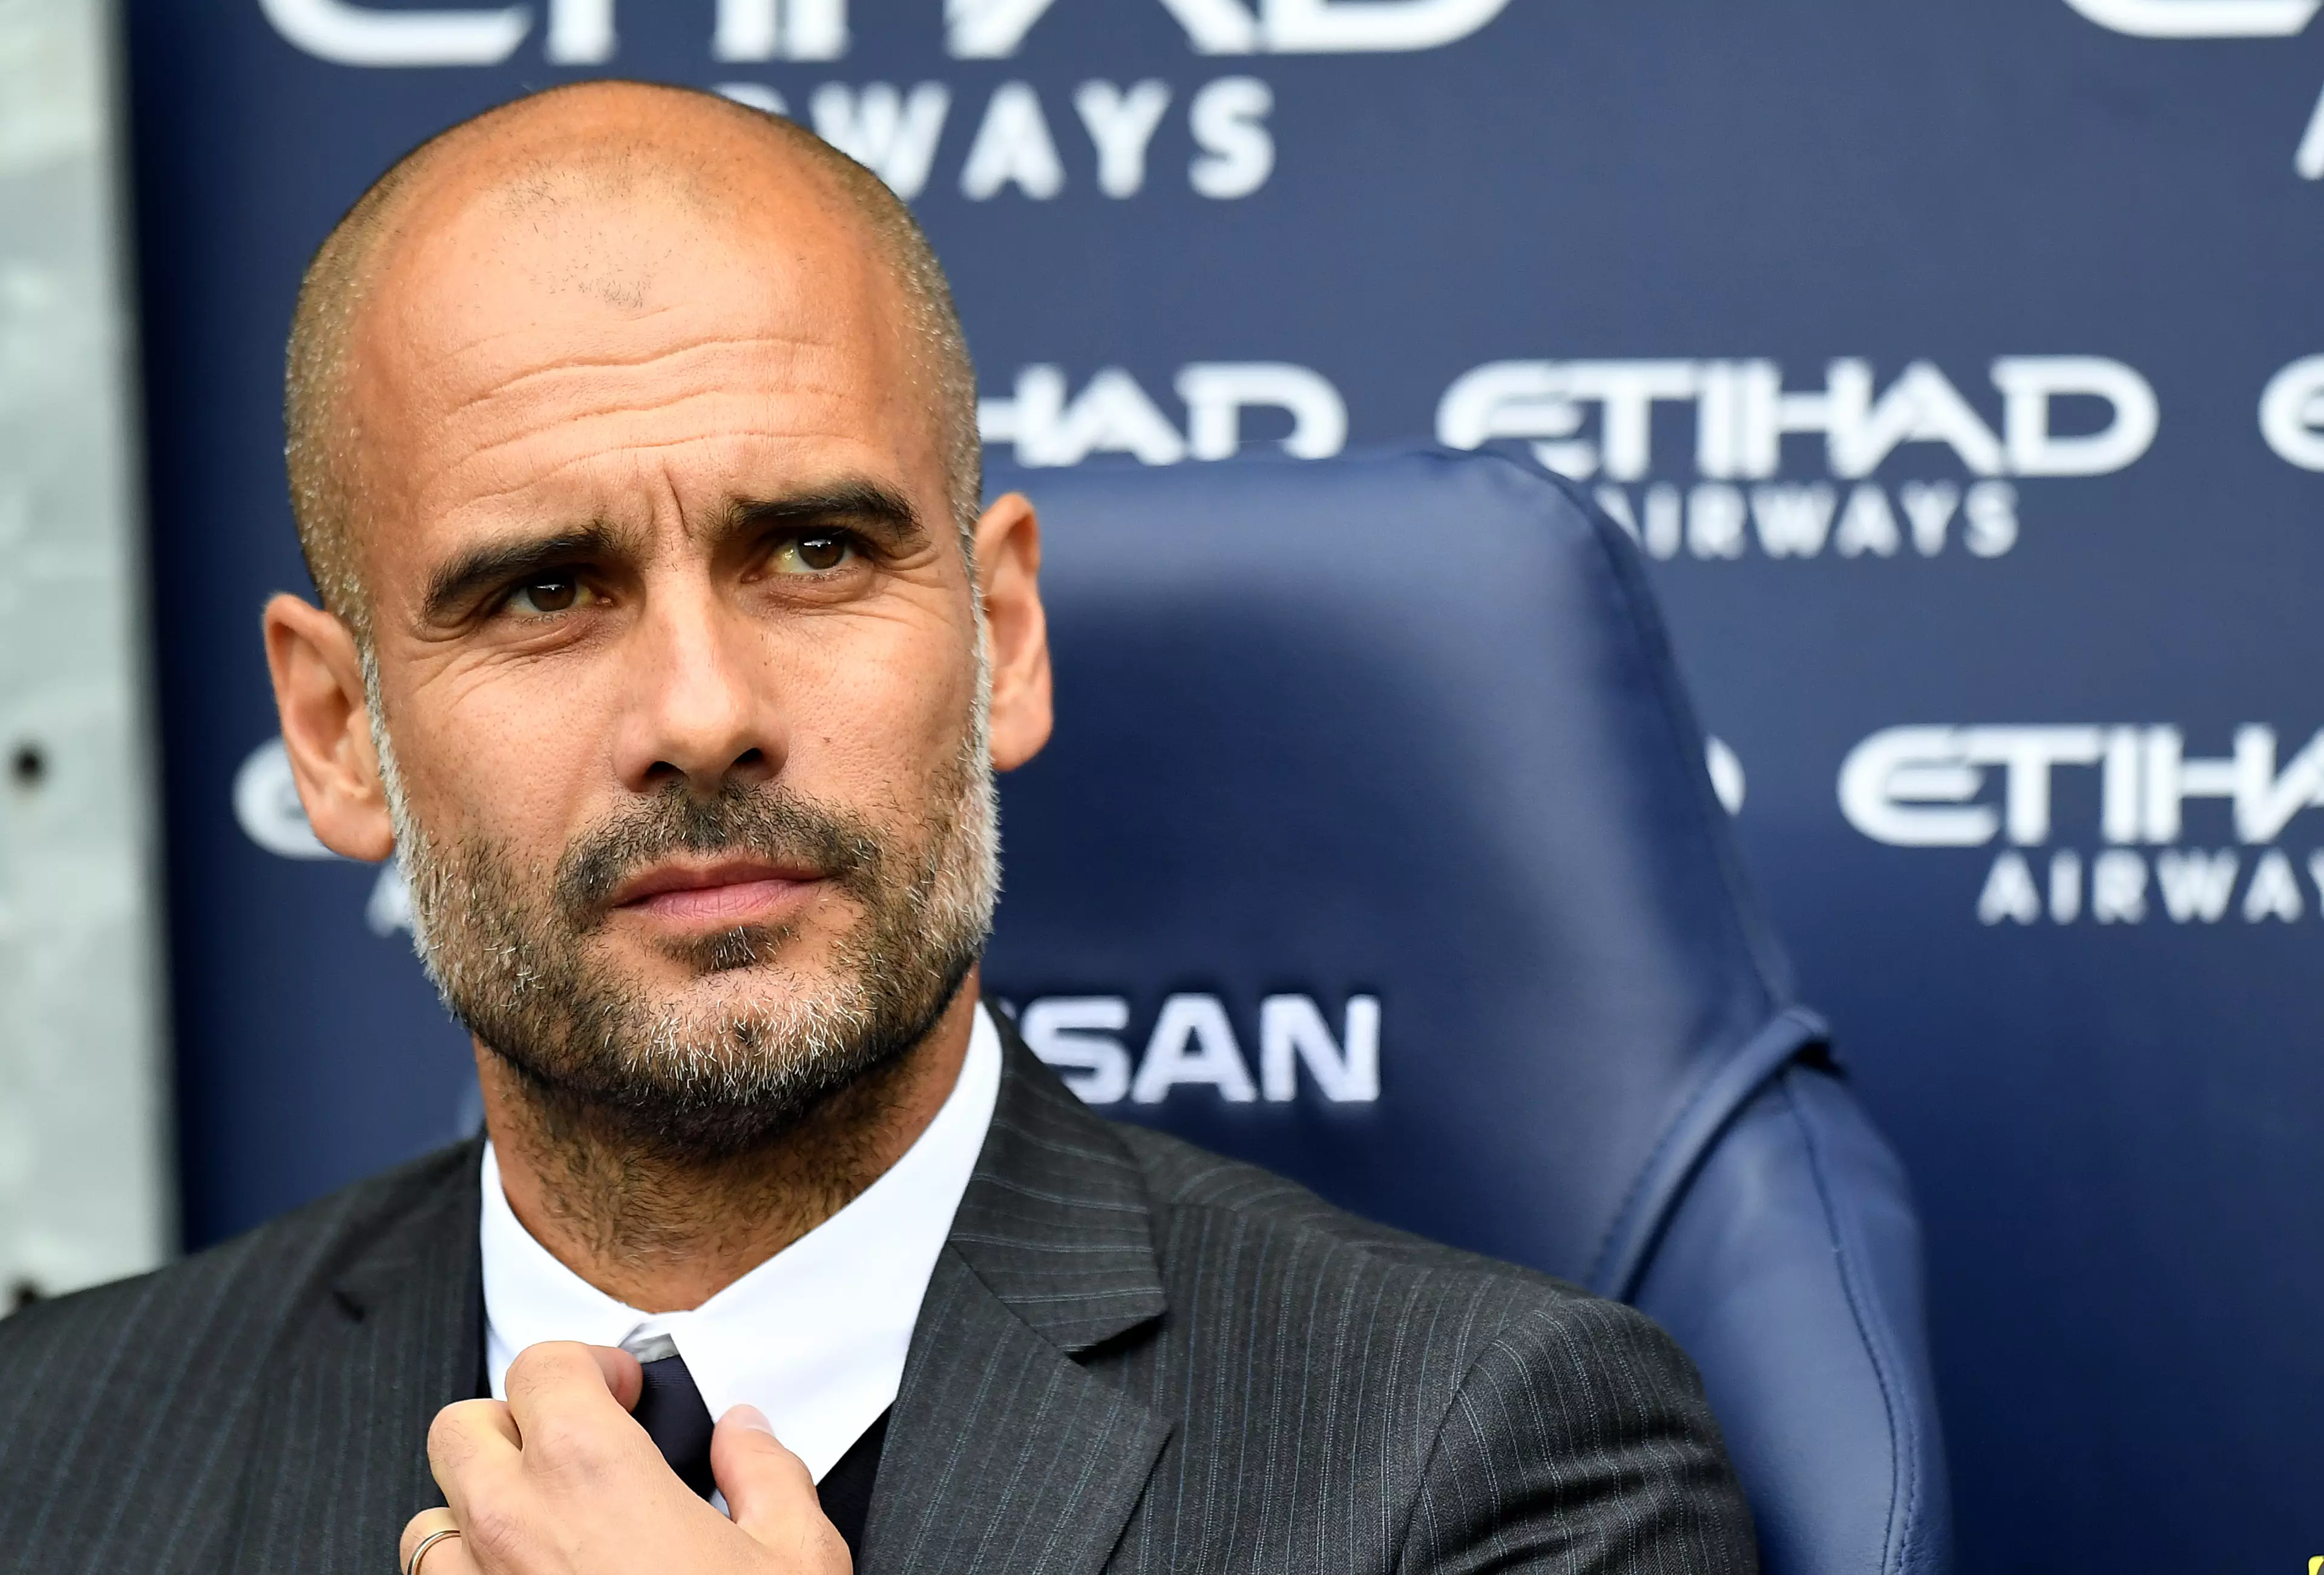 Pep Guardiola's Axed XI Is Absolute Fire